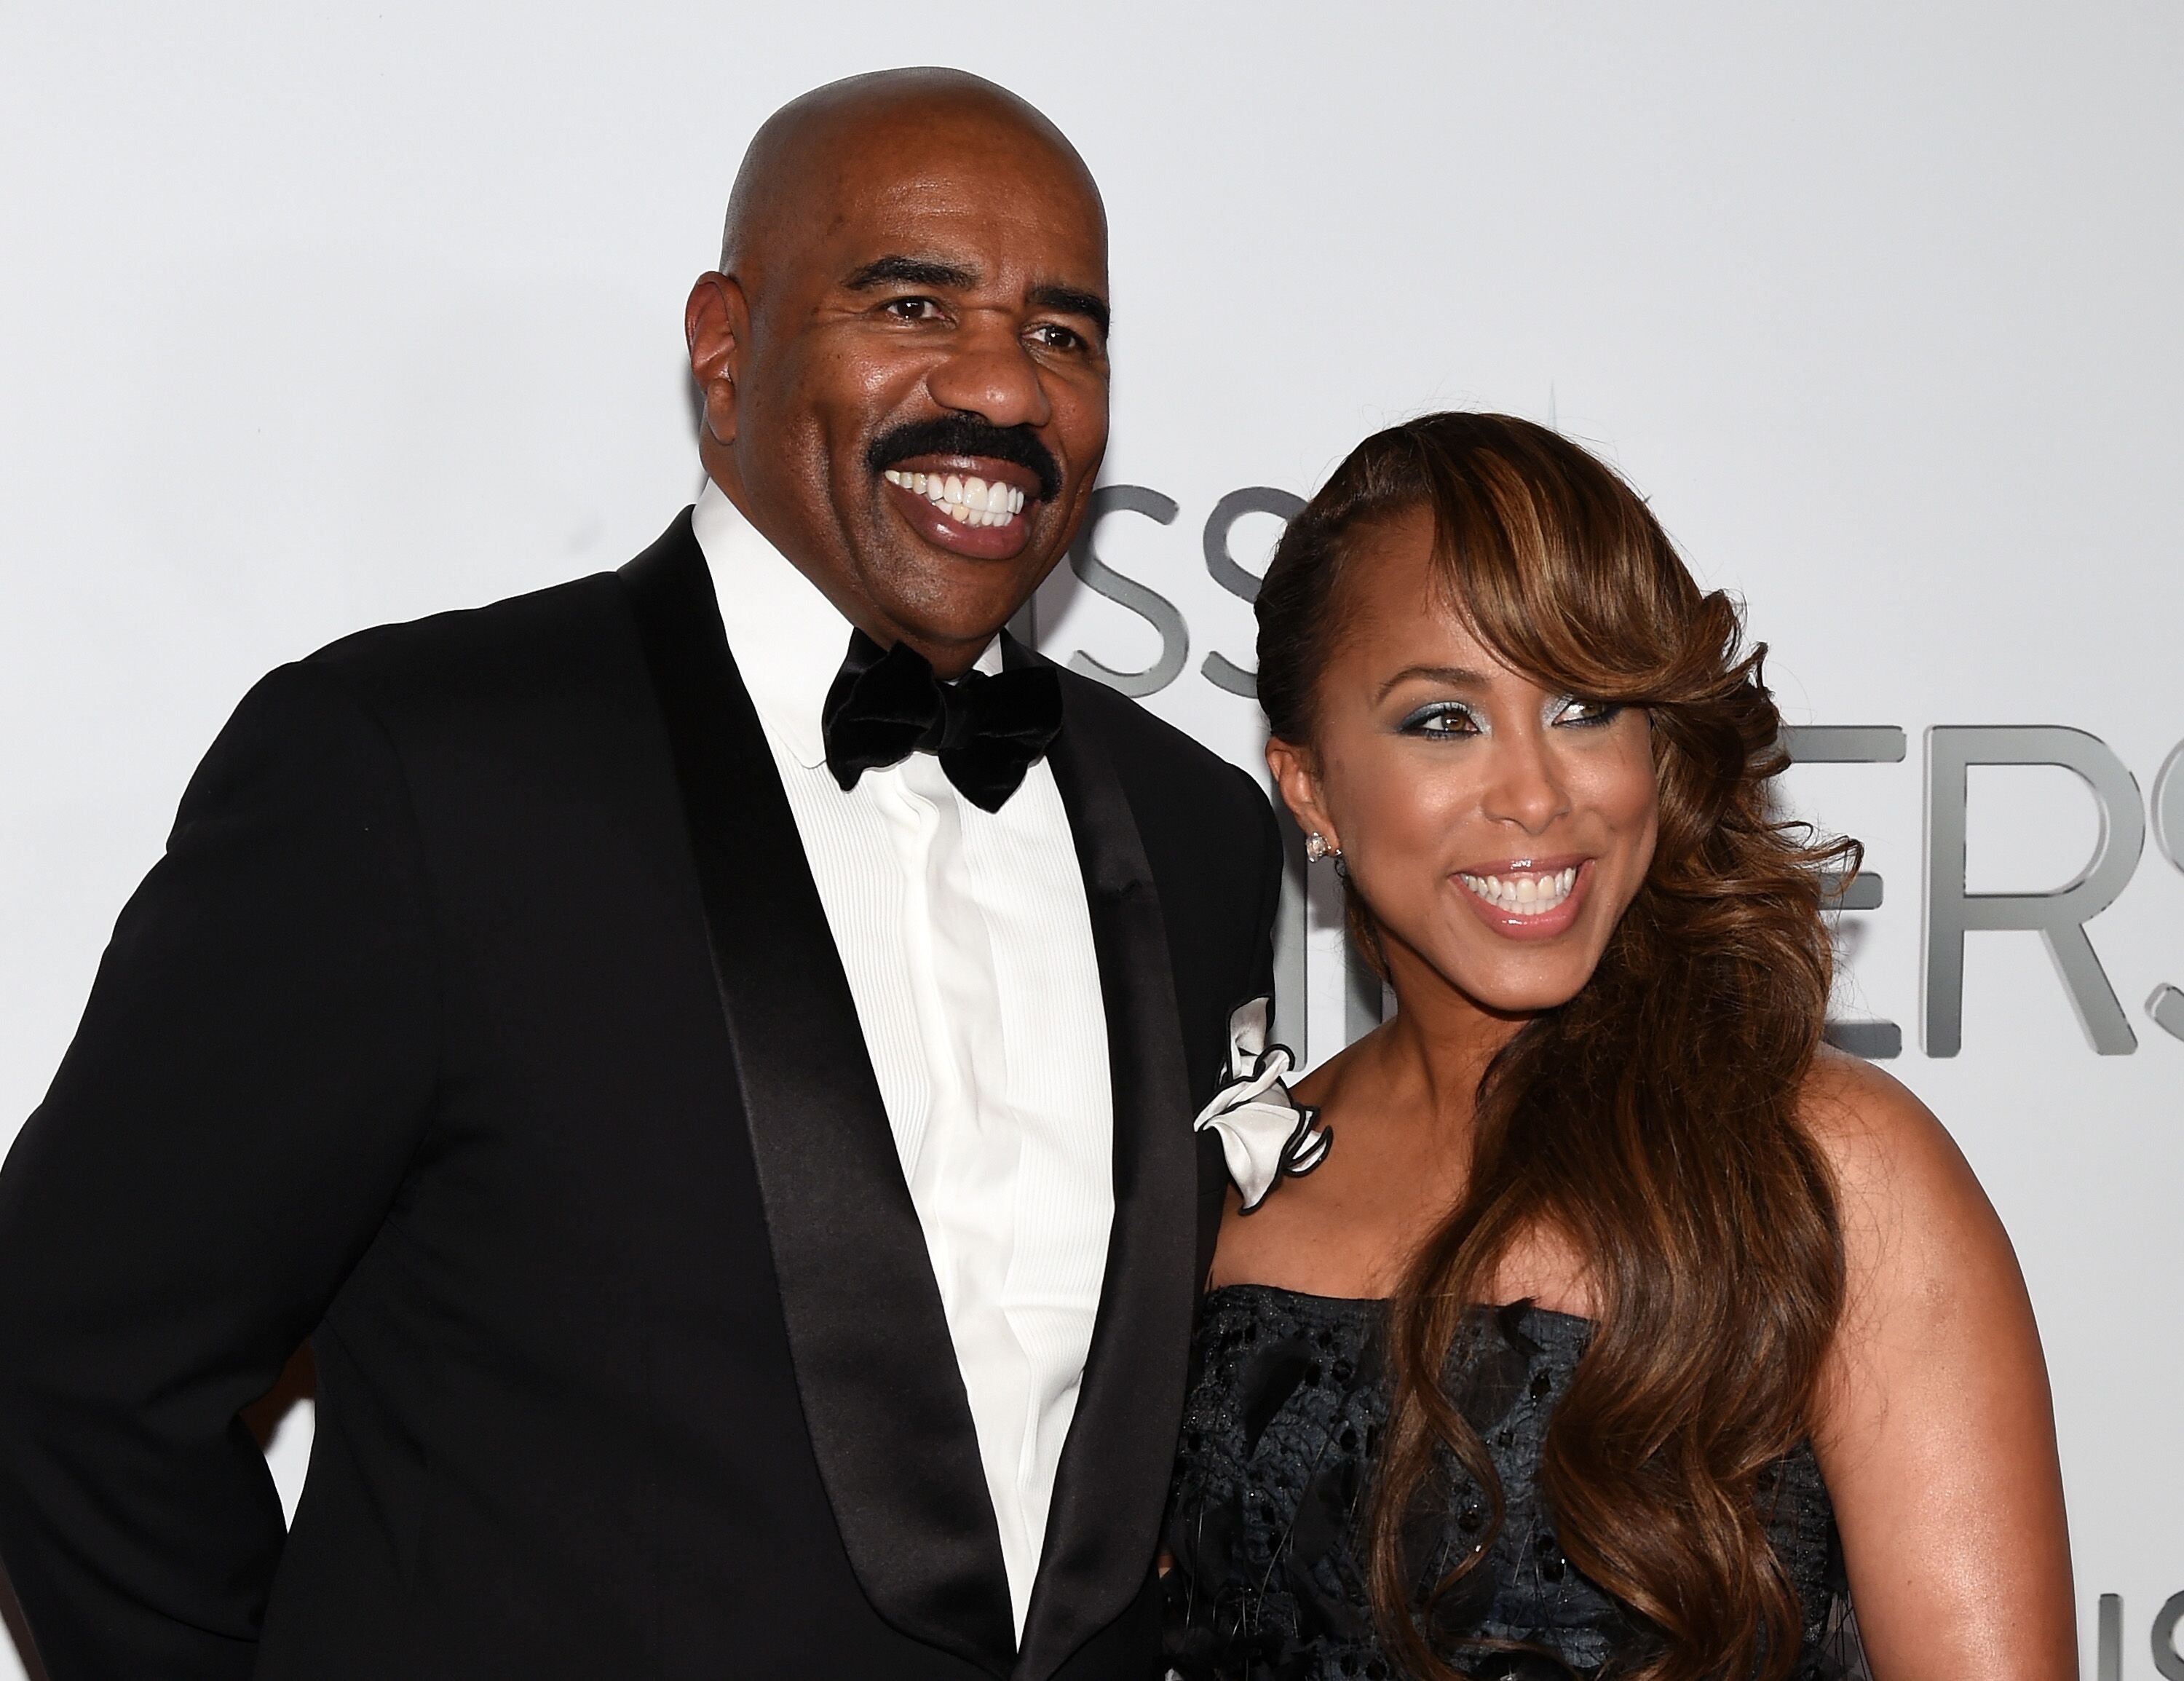 Steve Harvey and his wife Marjorie Harvey attend the 2015 Miss Universe Pageant at Planet Hollywood Resort & Casino on December 20, 2015 | Photo: Getty Images